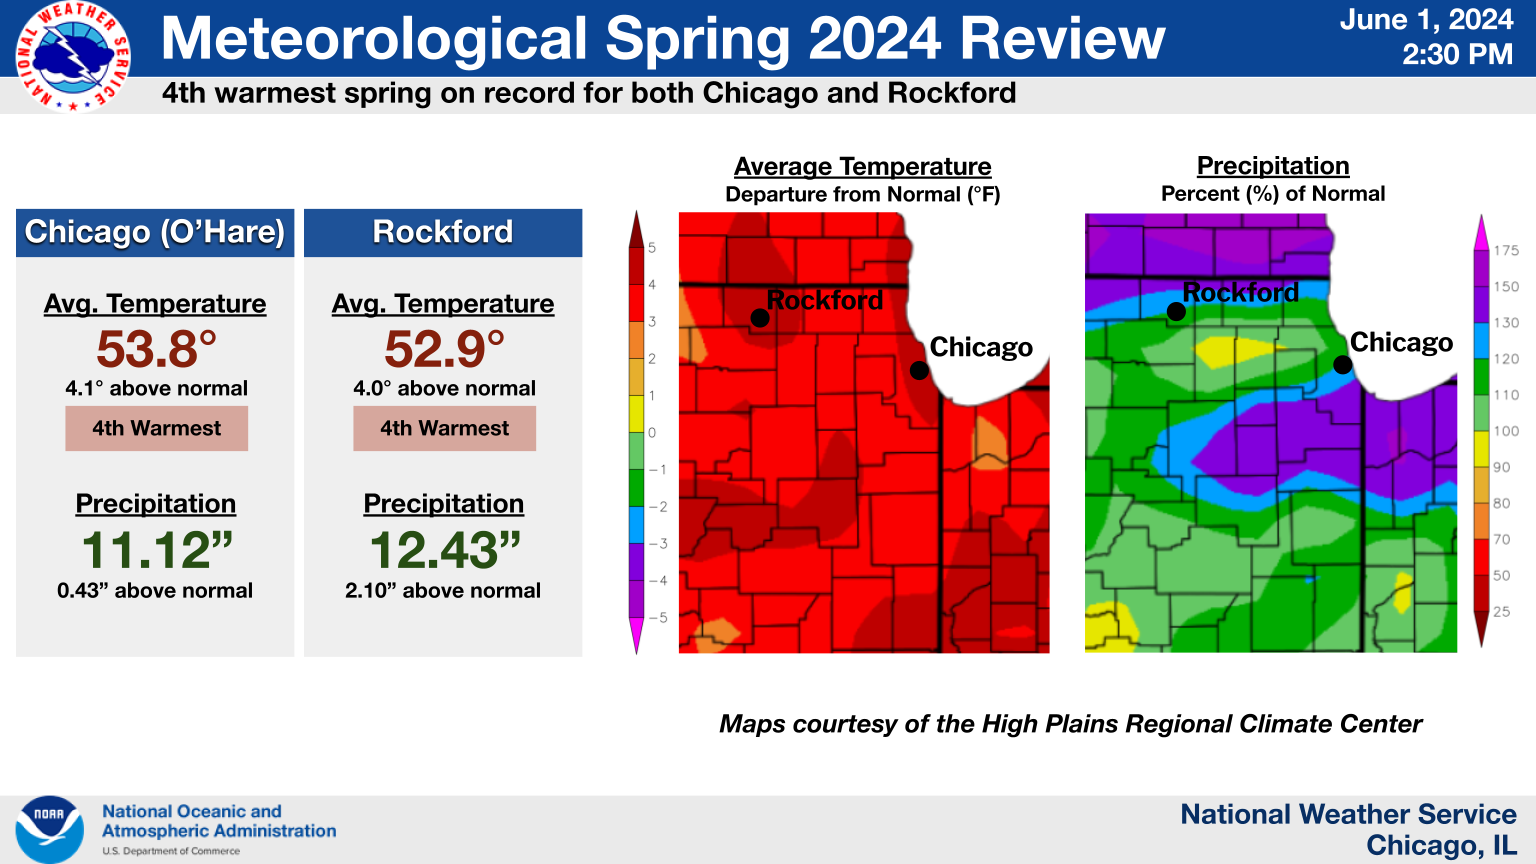 Headline: Meteorological Spring 2024 Review. Sub-Headline: 4th warmest spring on record for both Chicago and Rockford. Chicago (Oâ€™Hare): Average Temperature: 53.8 degrees; 4.1 degrees above normal. Precipitation: 11.12 inches; 0.43 inches above normal. Rockford: Average Temperature: 52.9 degrees; 4.0 degrees above normal. Precipitation: 12.43 inches; 2.10 inches above normal. Graphic Created: Saturday, June 1, 2024 2:30 PM CDT